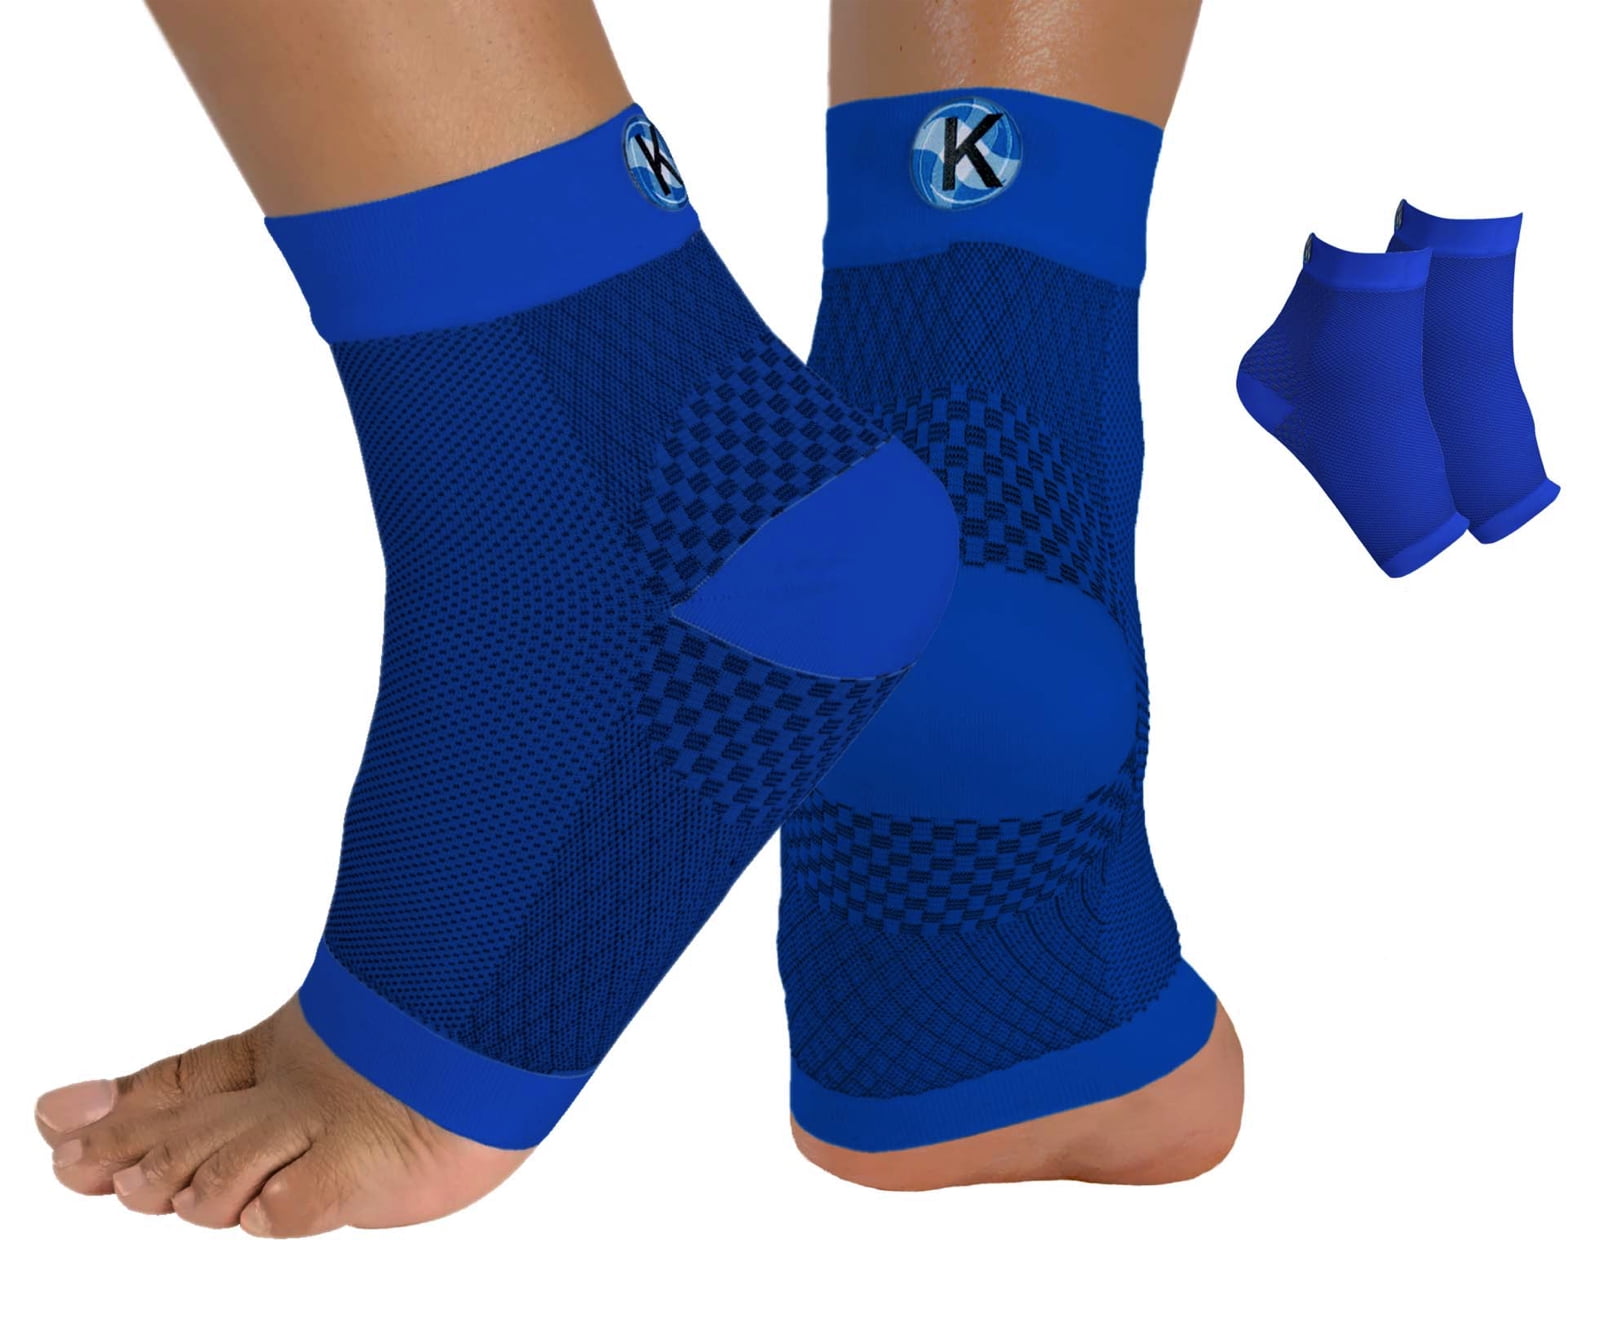 NatraCure Cold Therapy Socks - Gel Ice Treatment for feet, Heels, Swelling,  Arch Pain - (Size: Small/Medium) 